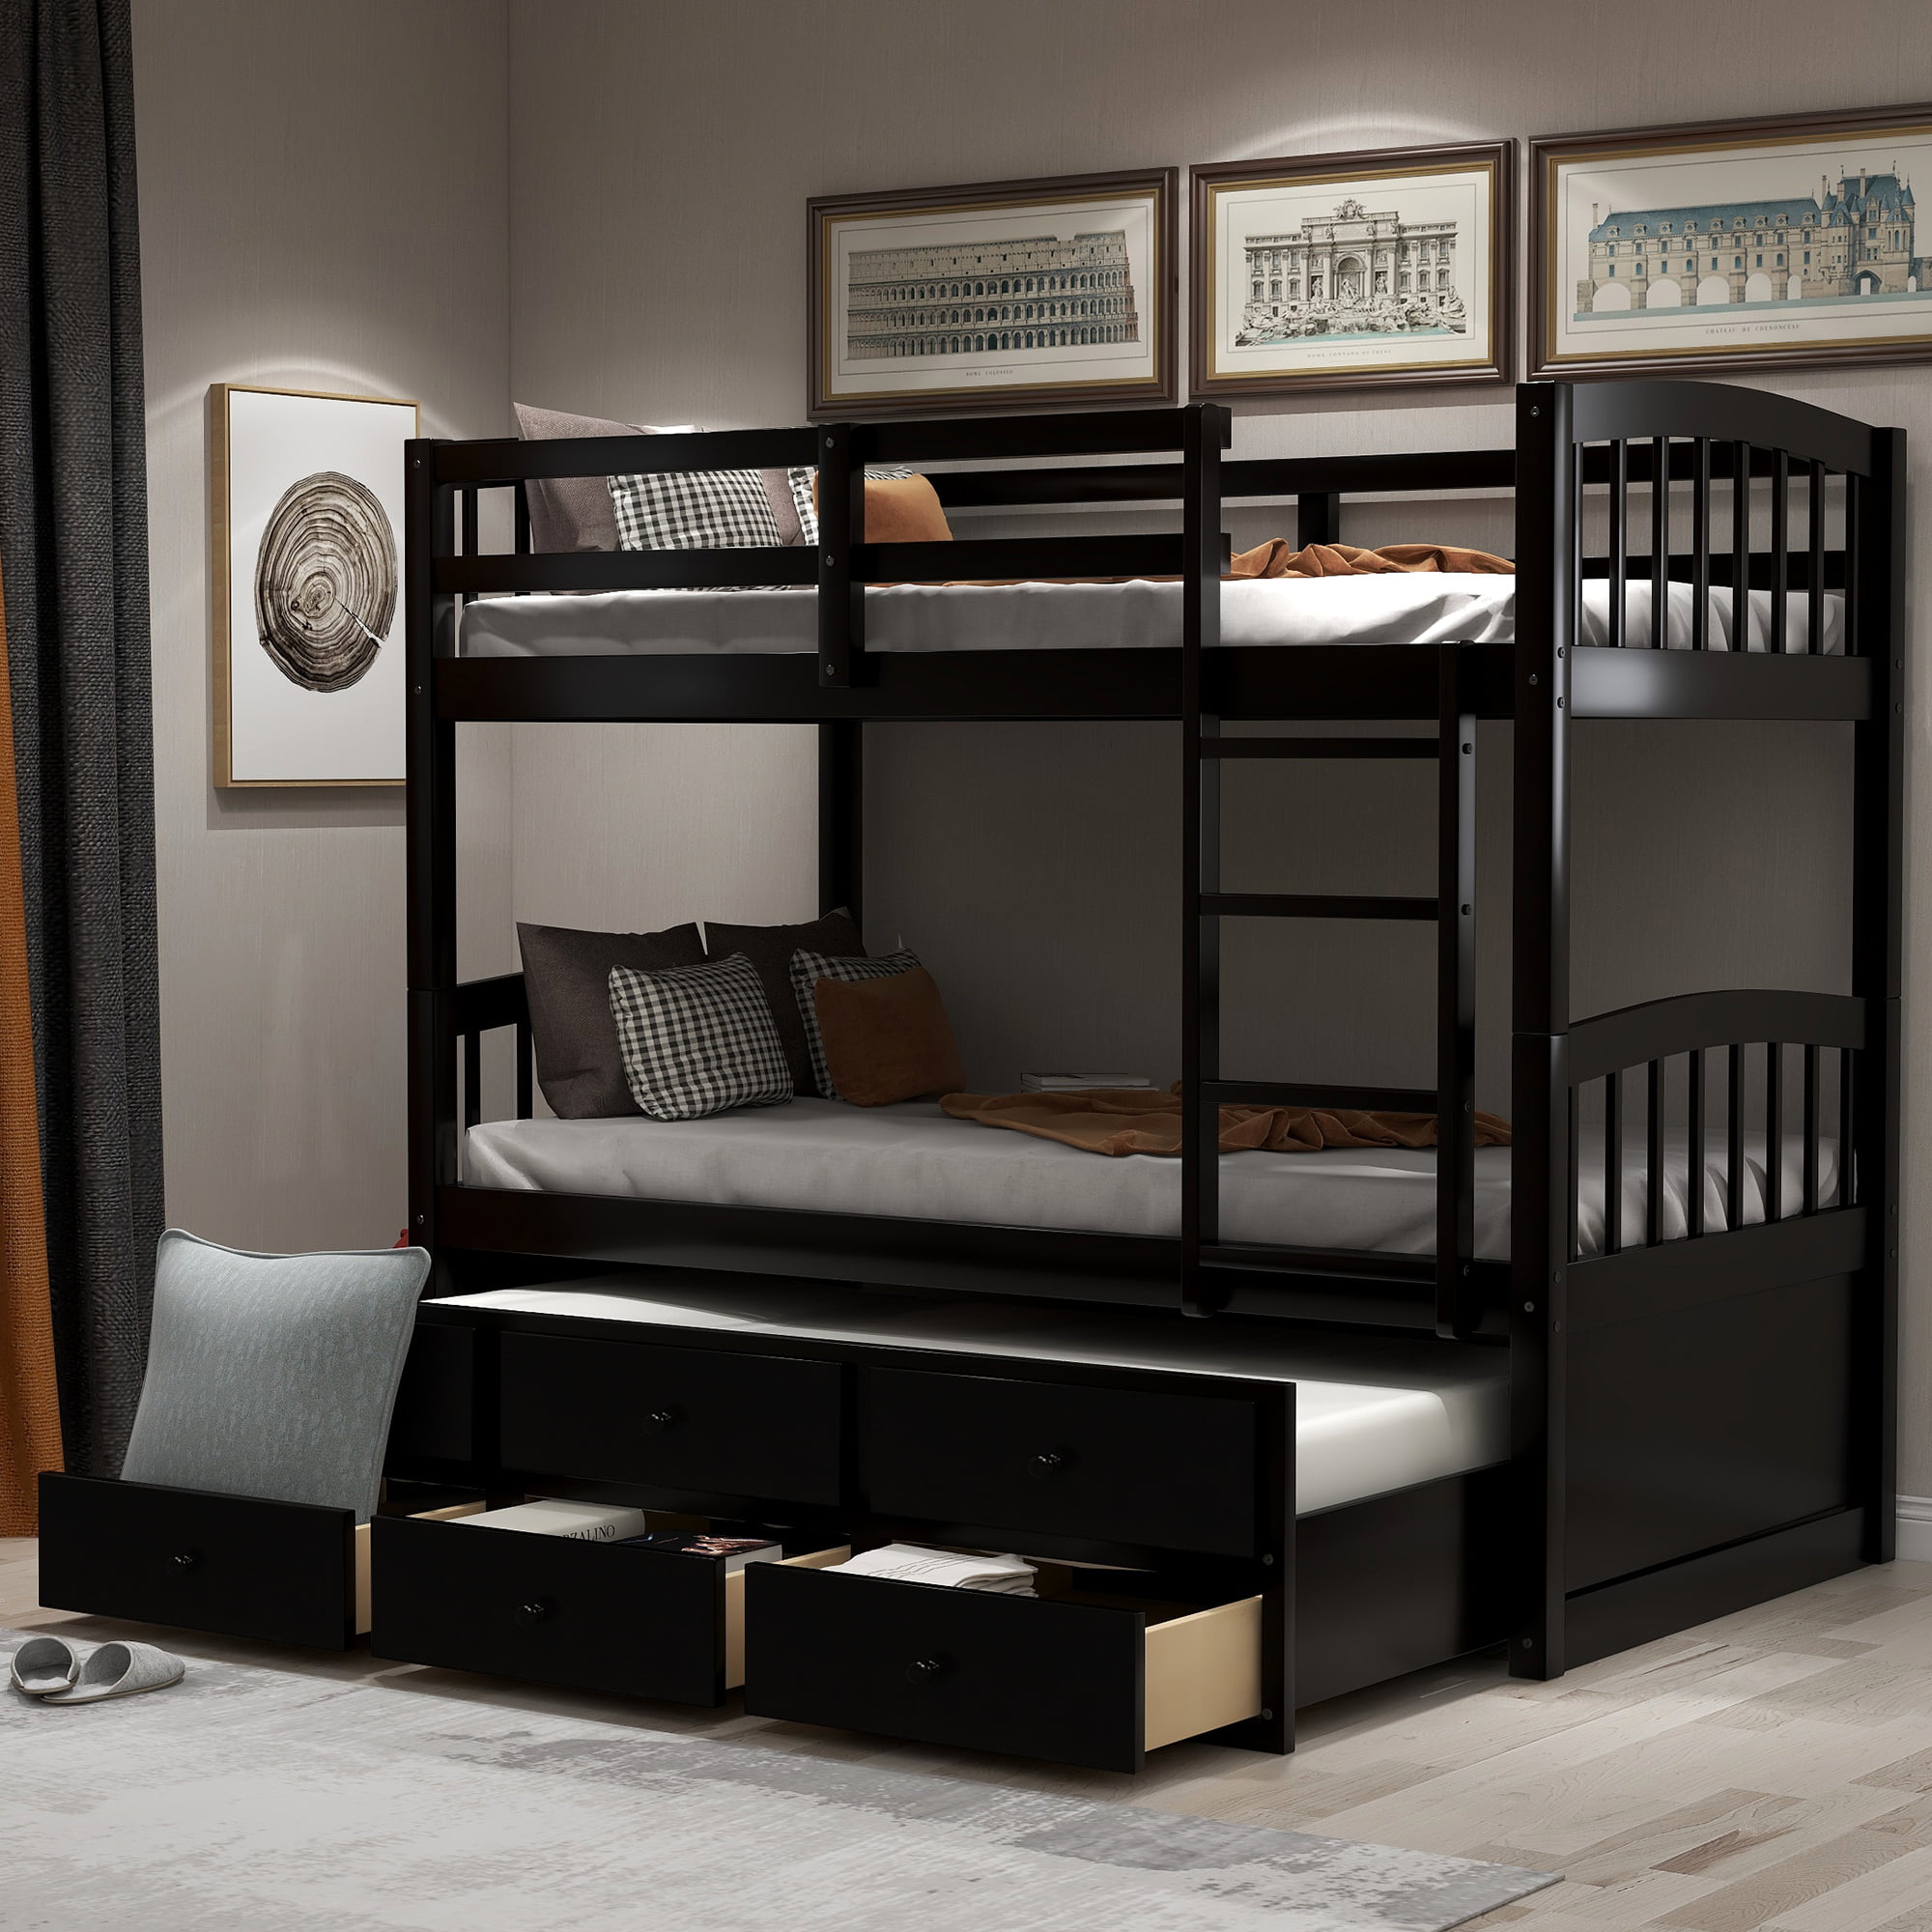 Twin Over Bunk Beds Solid Wood, Twin Bunk Beds With Storage Drawers